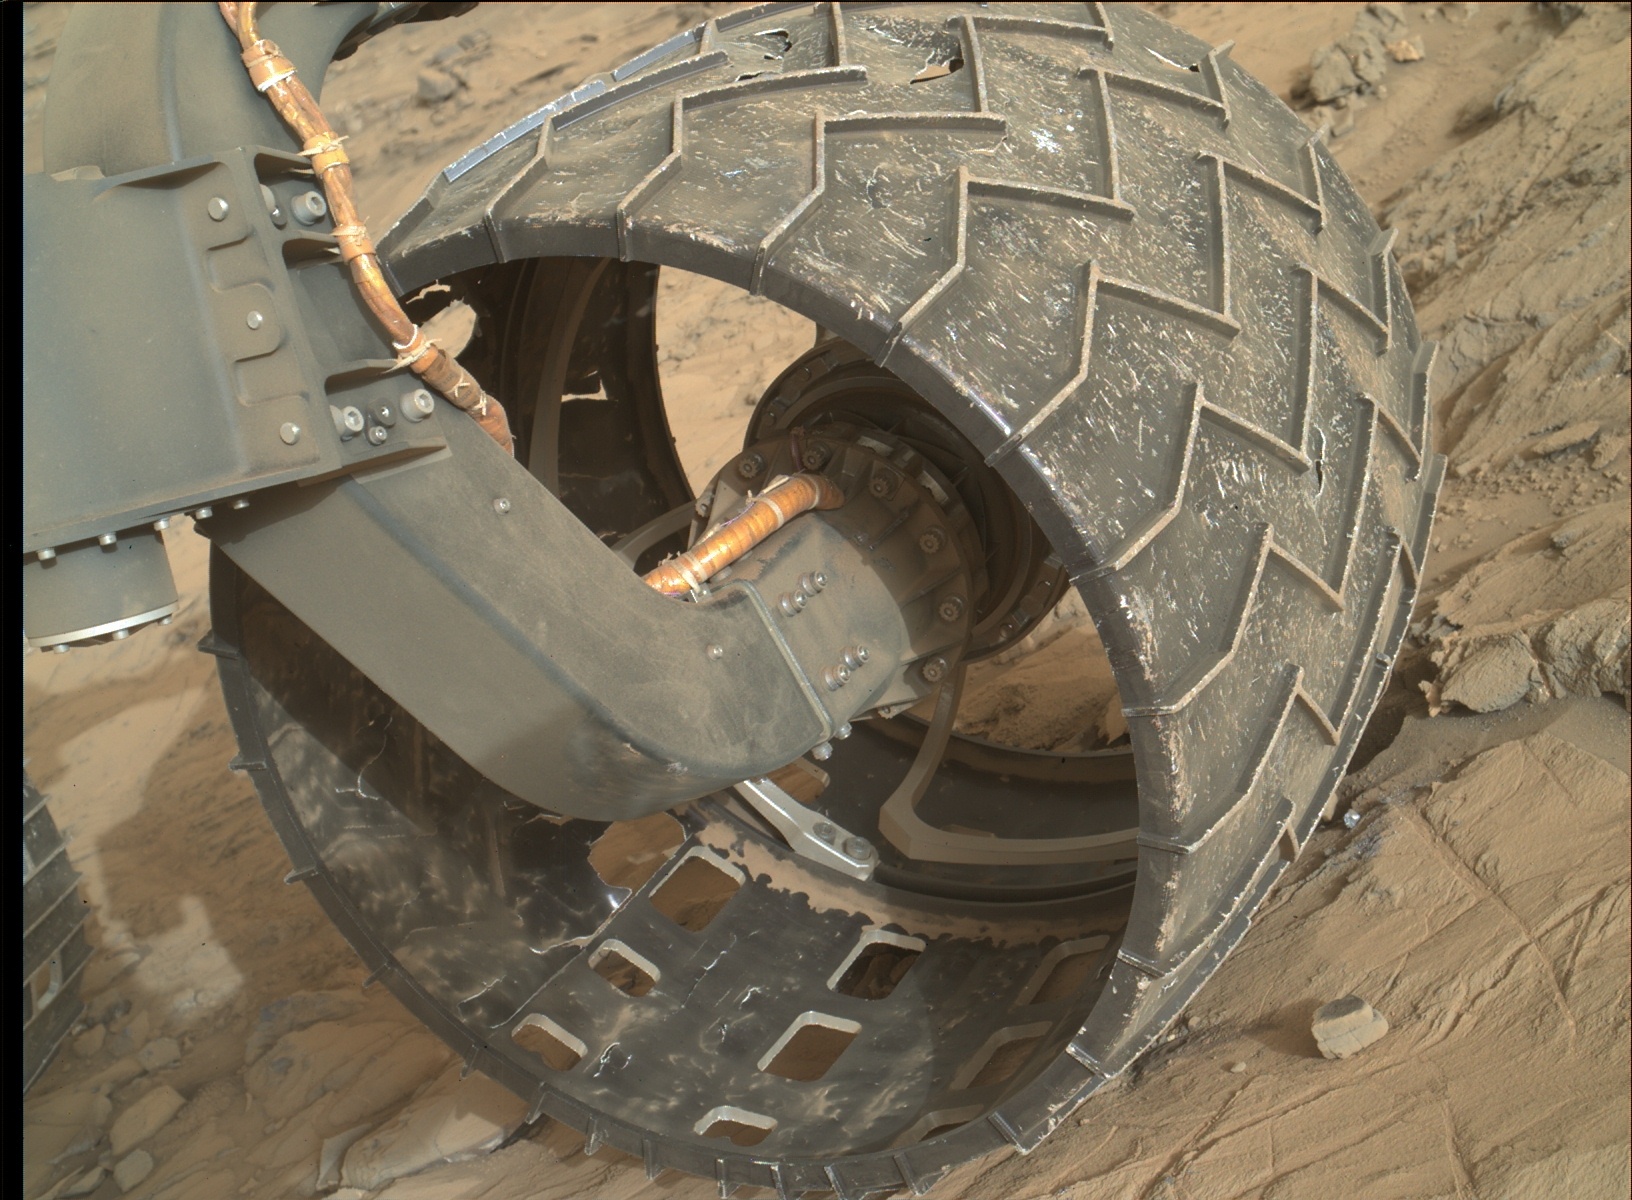 Nasa's Mars rover Curiosity acquired this image using its Mars Hand Lens Imager (MAHLI) on Sol 1355